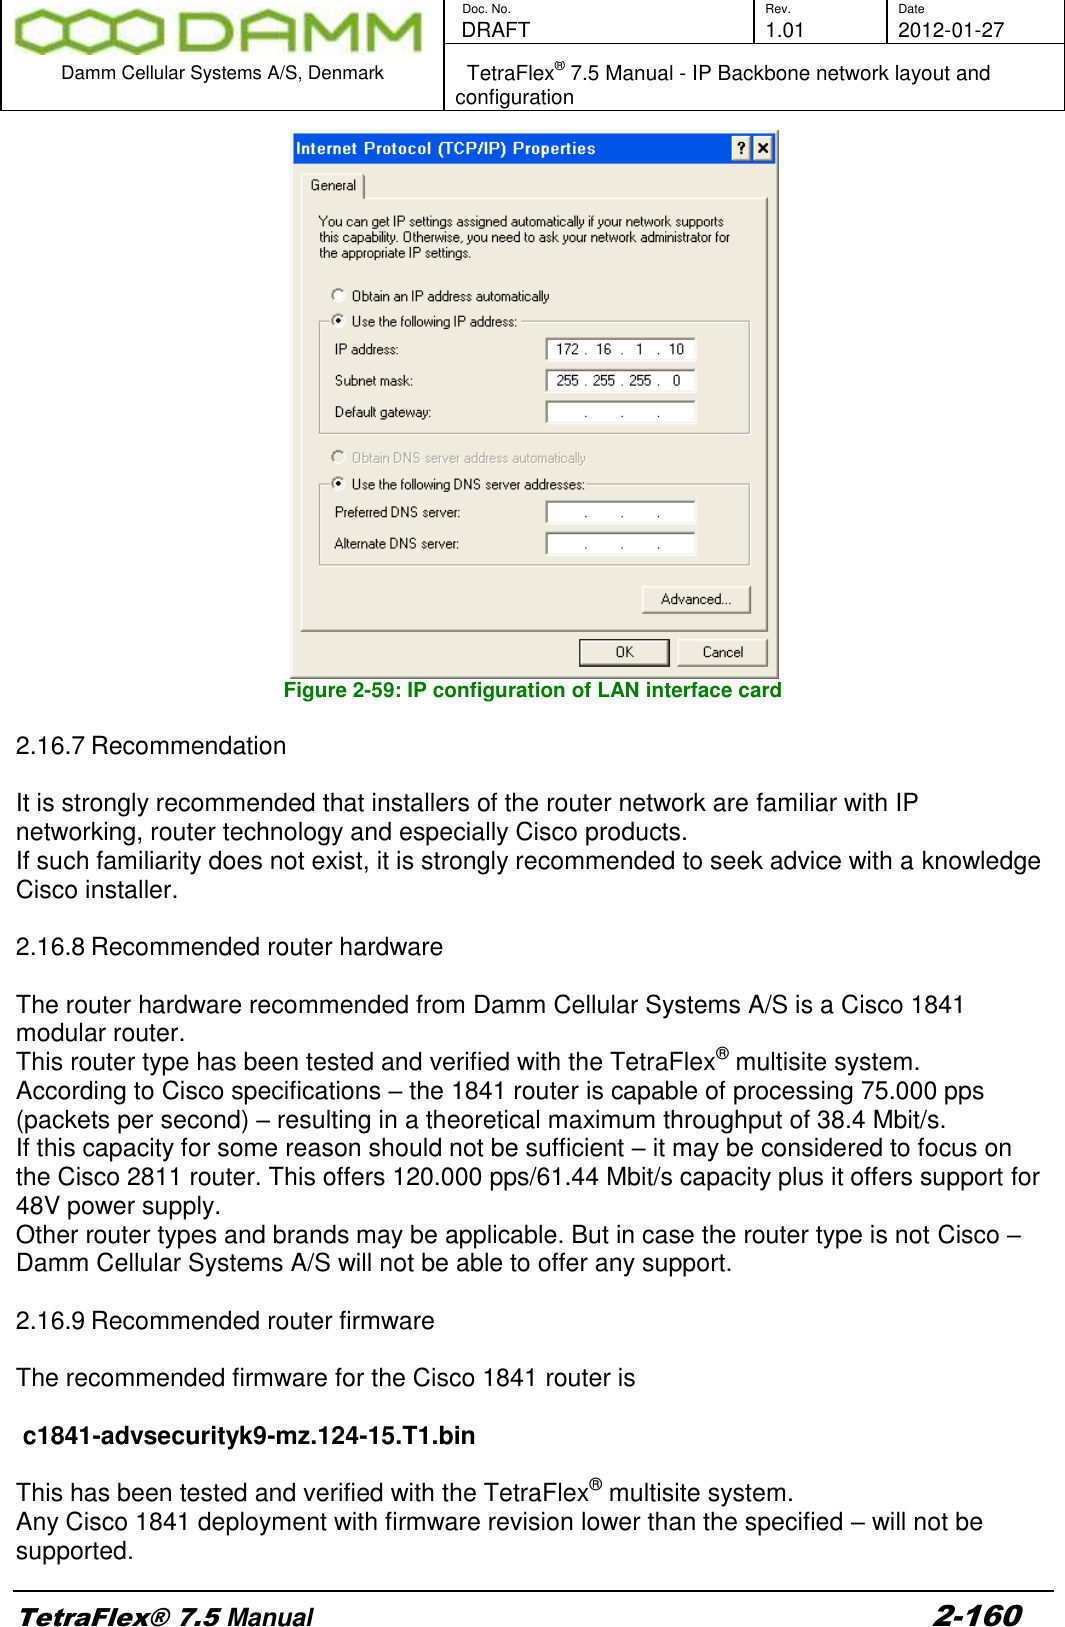        Doc. No. Rev. Date    DRAFT  1.01 2012-01-27  Damm Cellular Systems A/S, Denmark   TetraFlex® 7.5 Manual - IP Backbone network layout and configuration  TetraFlex® 7.5 Manual 2-160  Figure 2-59: IP configuration of LAN interface card  2.16.7 Recommendation  It is strongly recommended that installers of the router network are familiar with IP networking, router technology and especially Cisco products. If such familiarity does not exist, it is strongly recommended to seek advice with a knowledge Cisco installer.  2.16.8 Recommended router hardware   The router hardware recommended from Damm Cellular Systems A/S is a Cisco 1841 modular router. This router type has been tested and verified with the TetraFlex® multisite system. According to Cisco specifications – the 1841 router is capable of processing 75.000 pps (packets per second) – resulting in a theoretical maximum throughput of 38.4 Mbit/s. If this capacity for some reason should not be sufficient – it may be considered to focus on the Cisco 2811 router. This offers 120.000 pps/61.44 Mbit/s capacity plus it offers support for 48V power supply. Other router types and brands may be applicable. But in case the router type is not Cisco – Damm Cellular Systems A/S will not be able to offer any support.  2.16.9 Recommended router firmware  The recommended firmware for the Cisco 1841 router is   c1841-advsecurityk9-mz.124-15.T1.bin  This has been tested and verified with the TetraFlex® multisite system. Any Cisco 1841 deployment with firmware revision lower than the specified – will not be supported. 